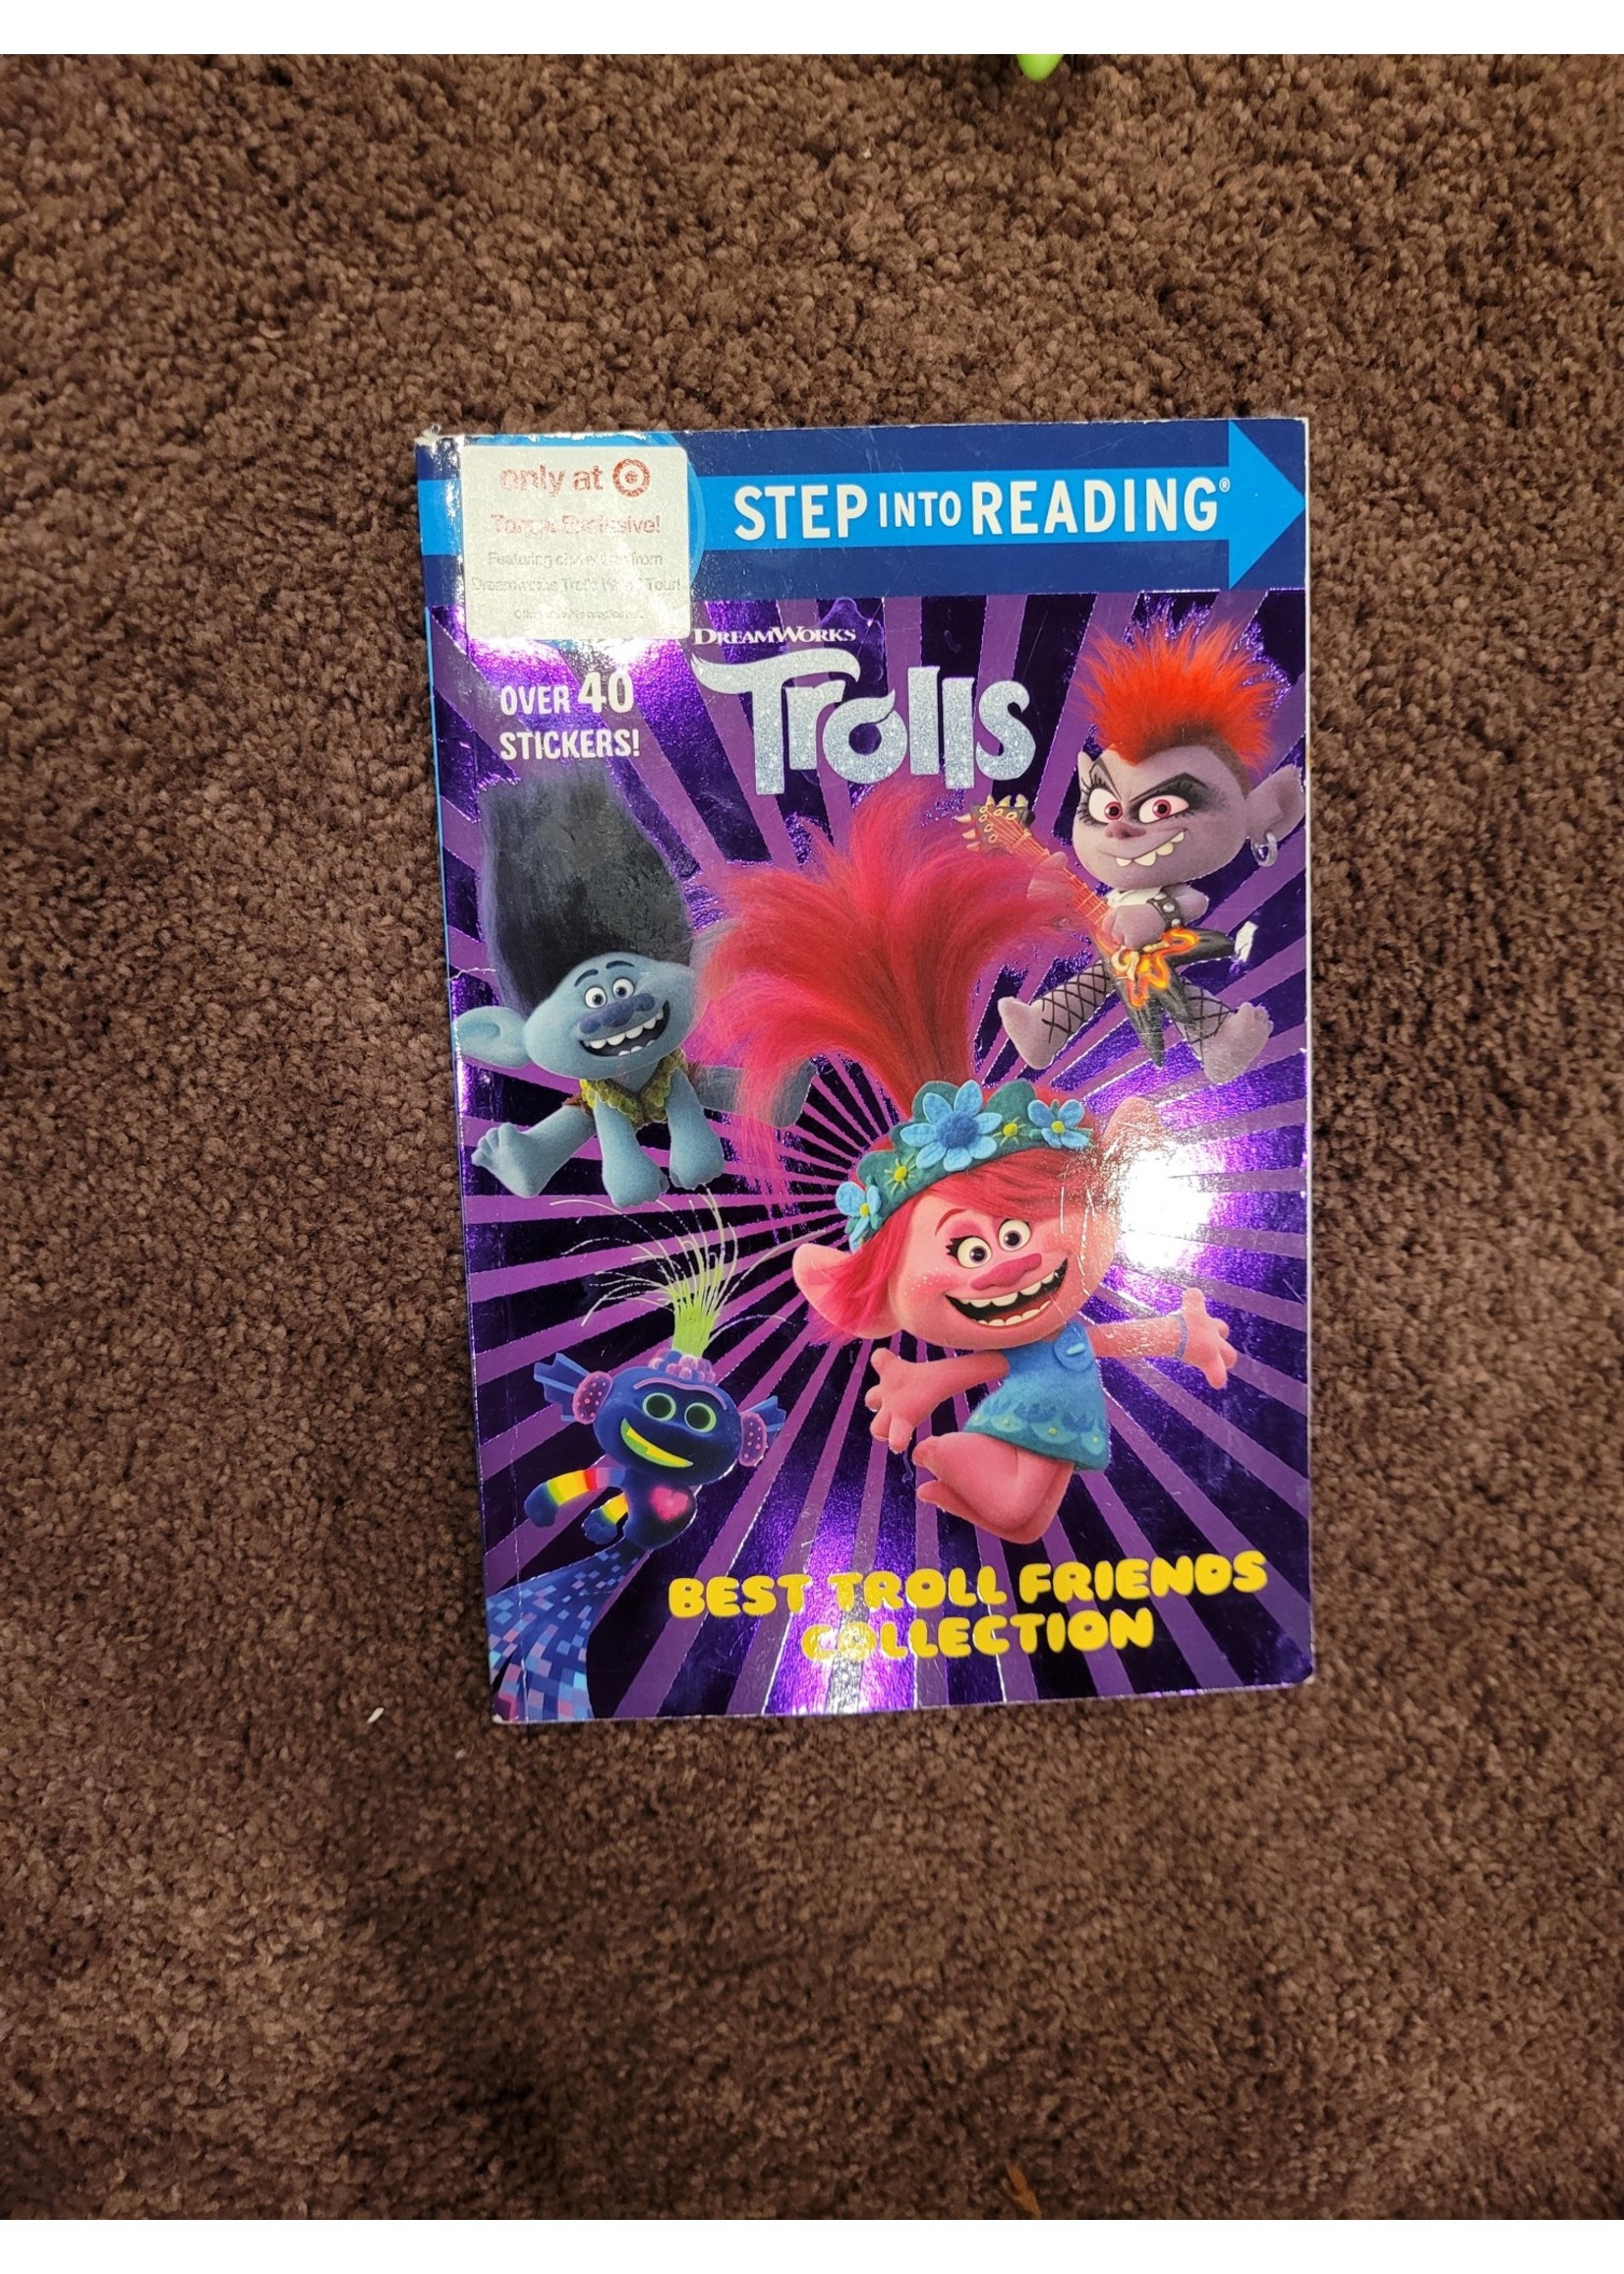 DreamWorks Trolls: Best Troll Friends Collection - Target Exclusive Edition (Paperback)